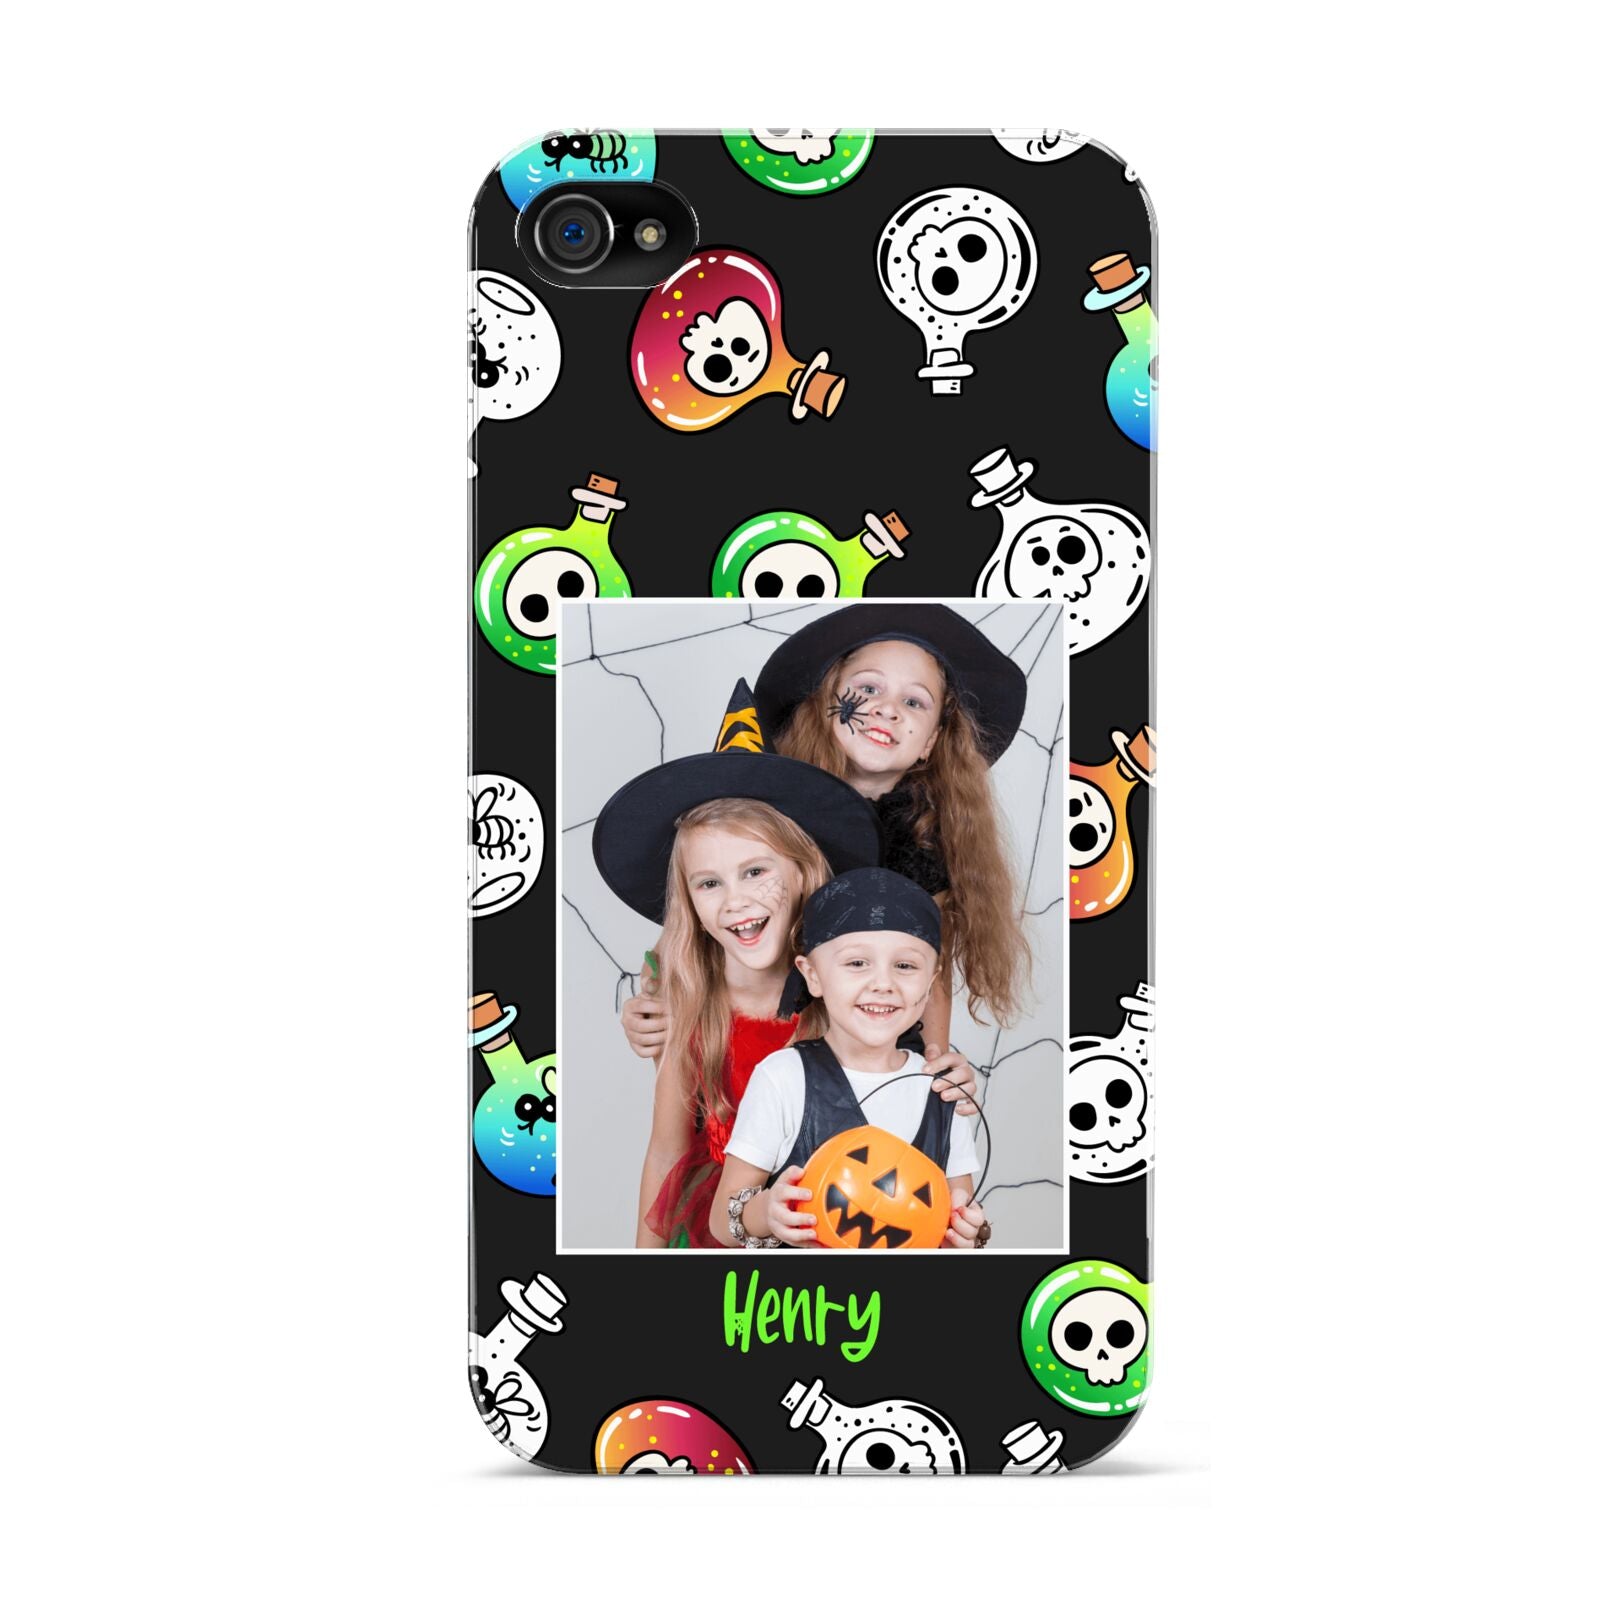 Spooky Potions Halloween Photo Upload Apple iPhone 4s Case